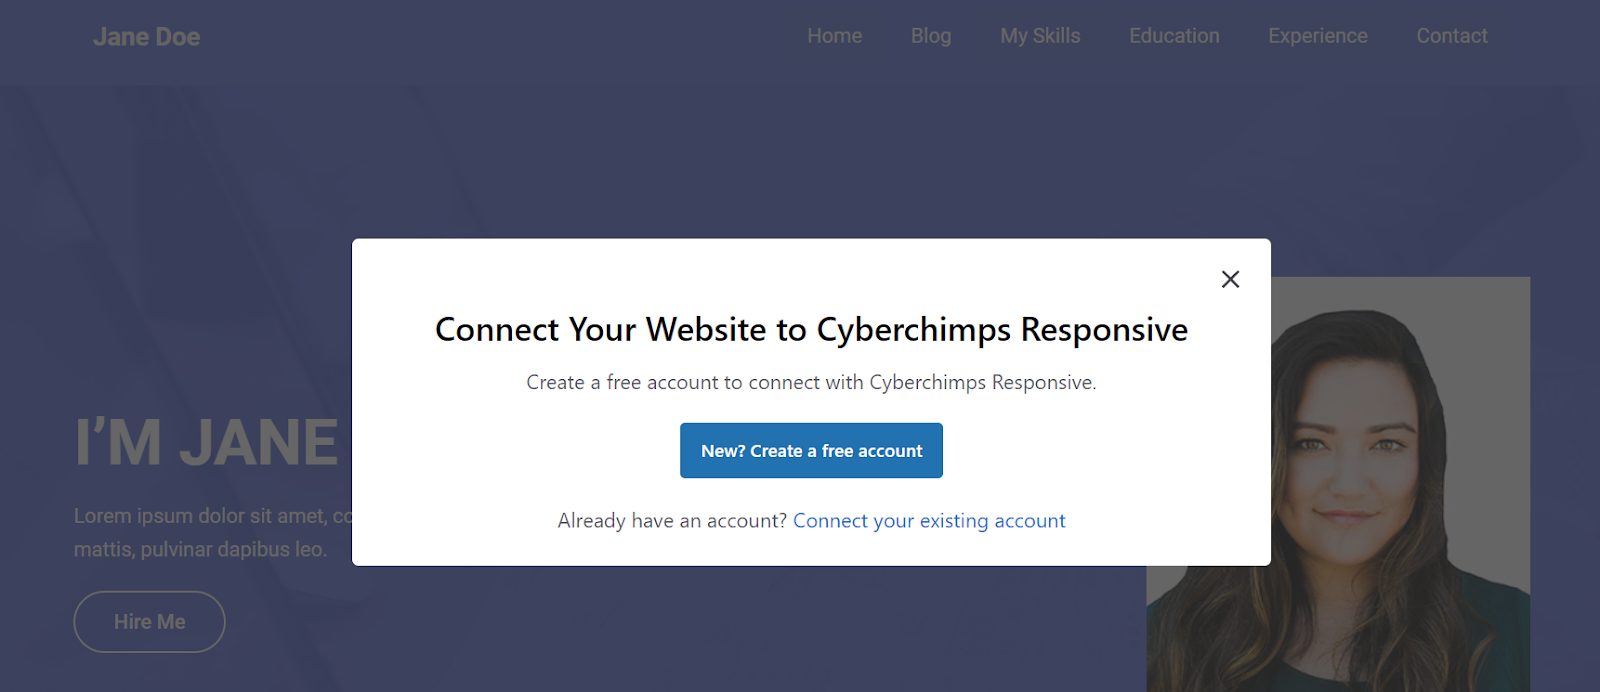 Connect your website to Cyberchimps Responsive.